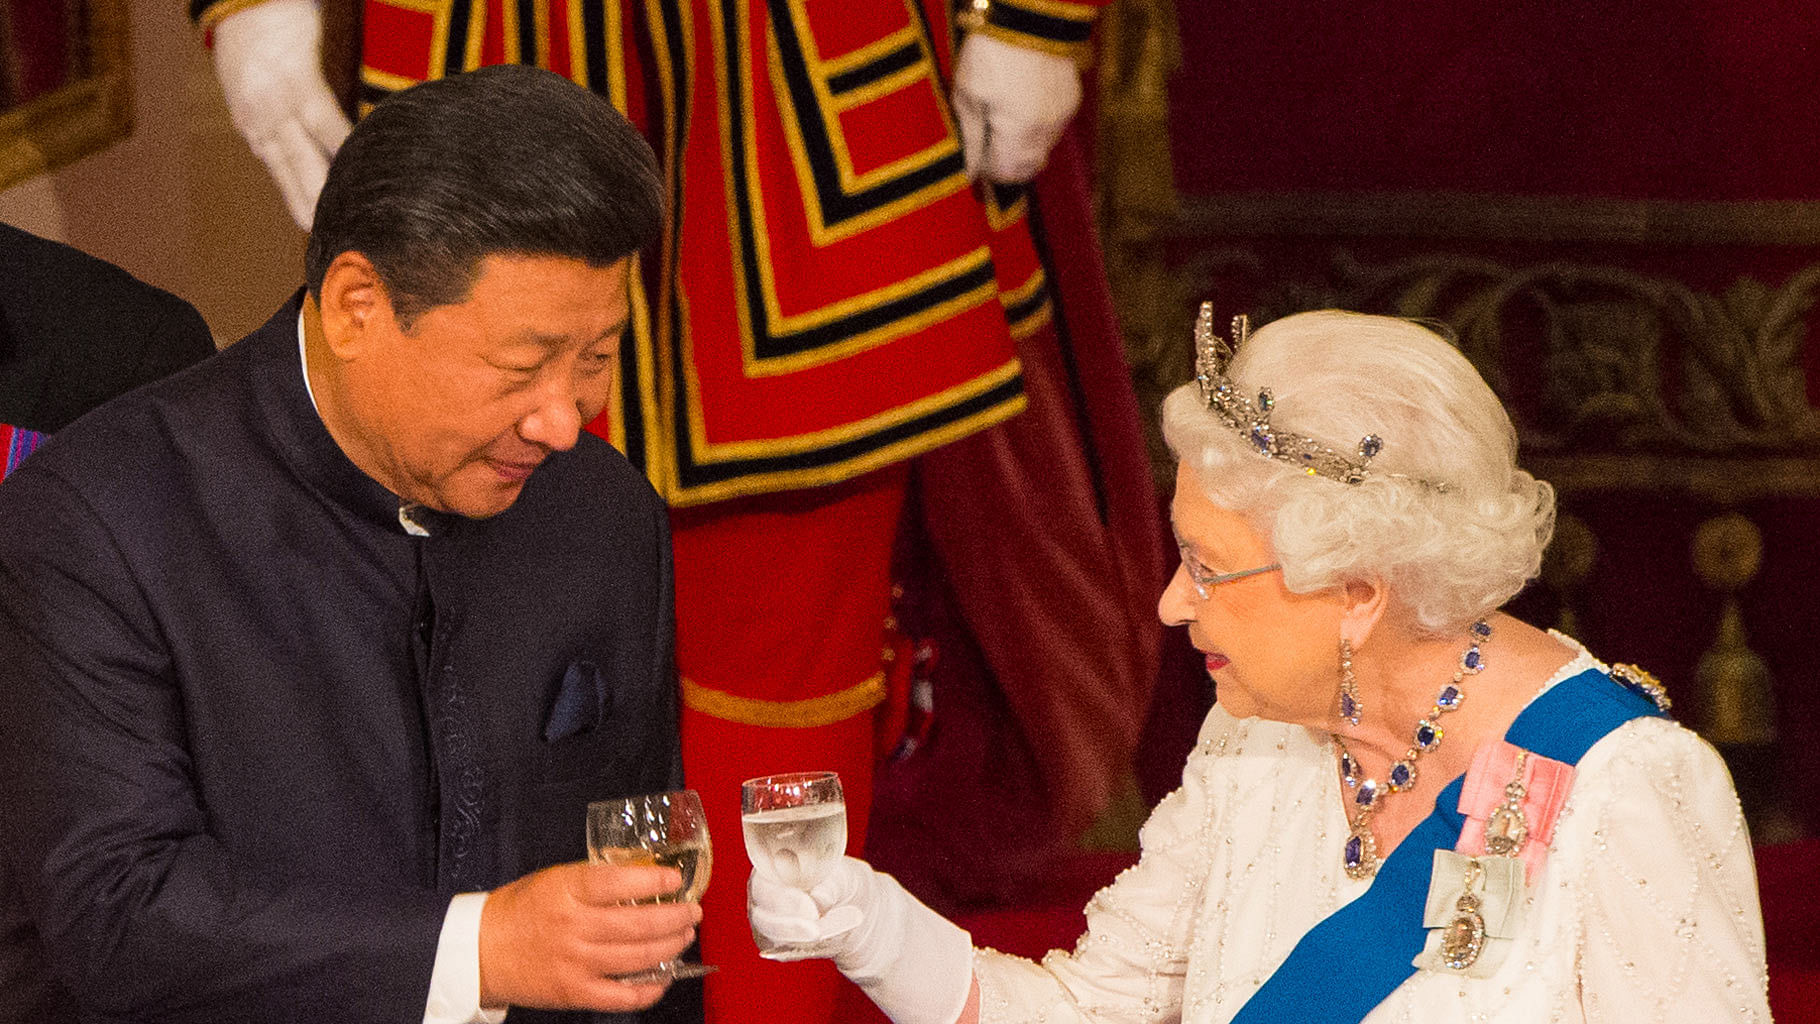 Chinese President Xi Jinping toasts with  Queen Elizabeth II during a ceremony in London on 20 October  2015. (Photo: AP)